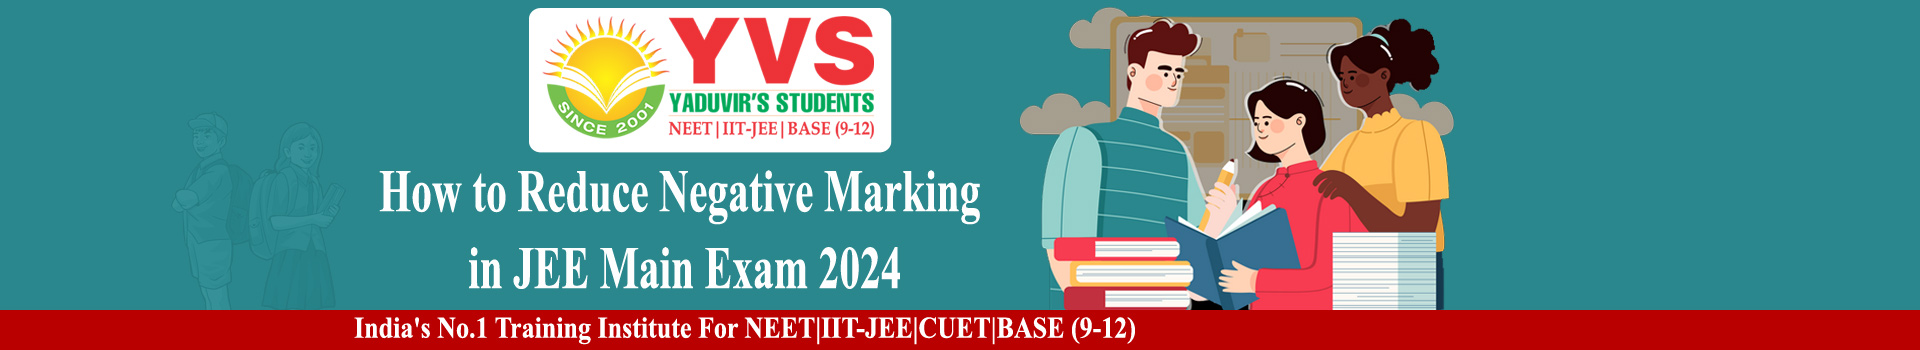 How to Reduce Negative Marking in JEE Main Exam 2024